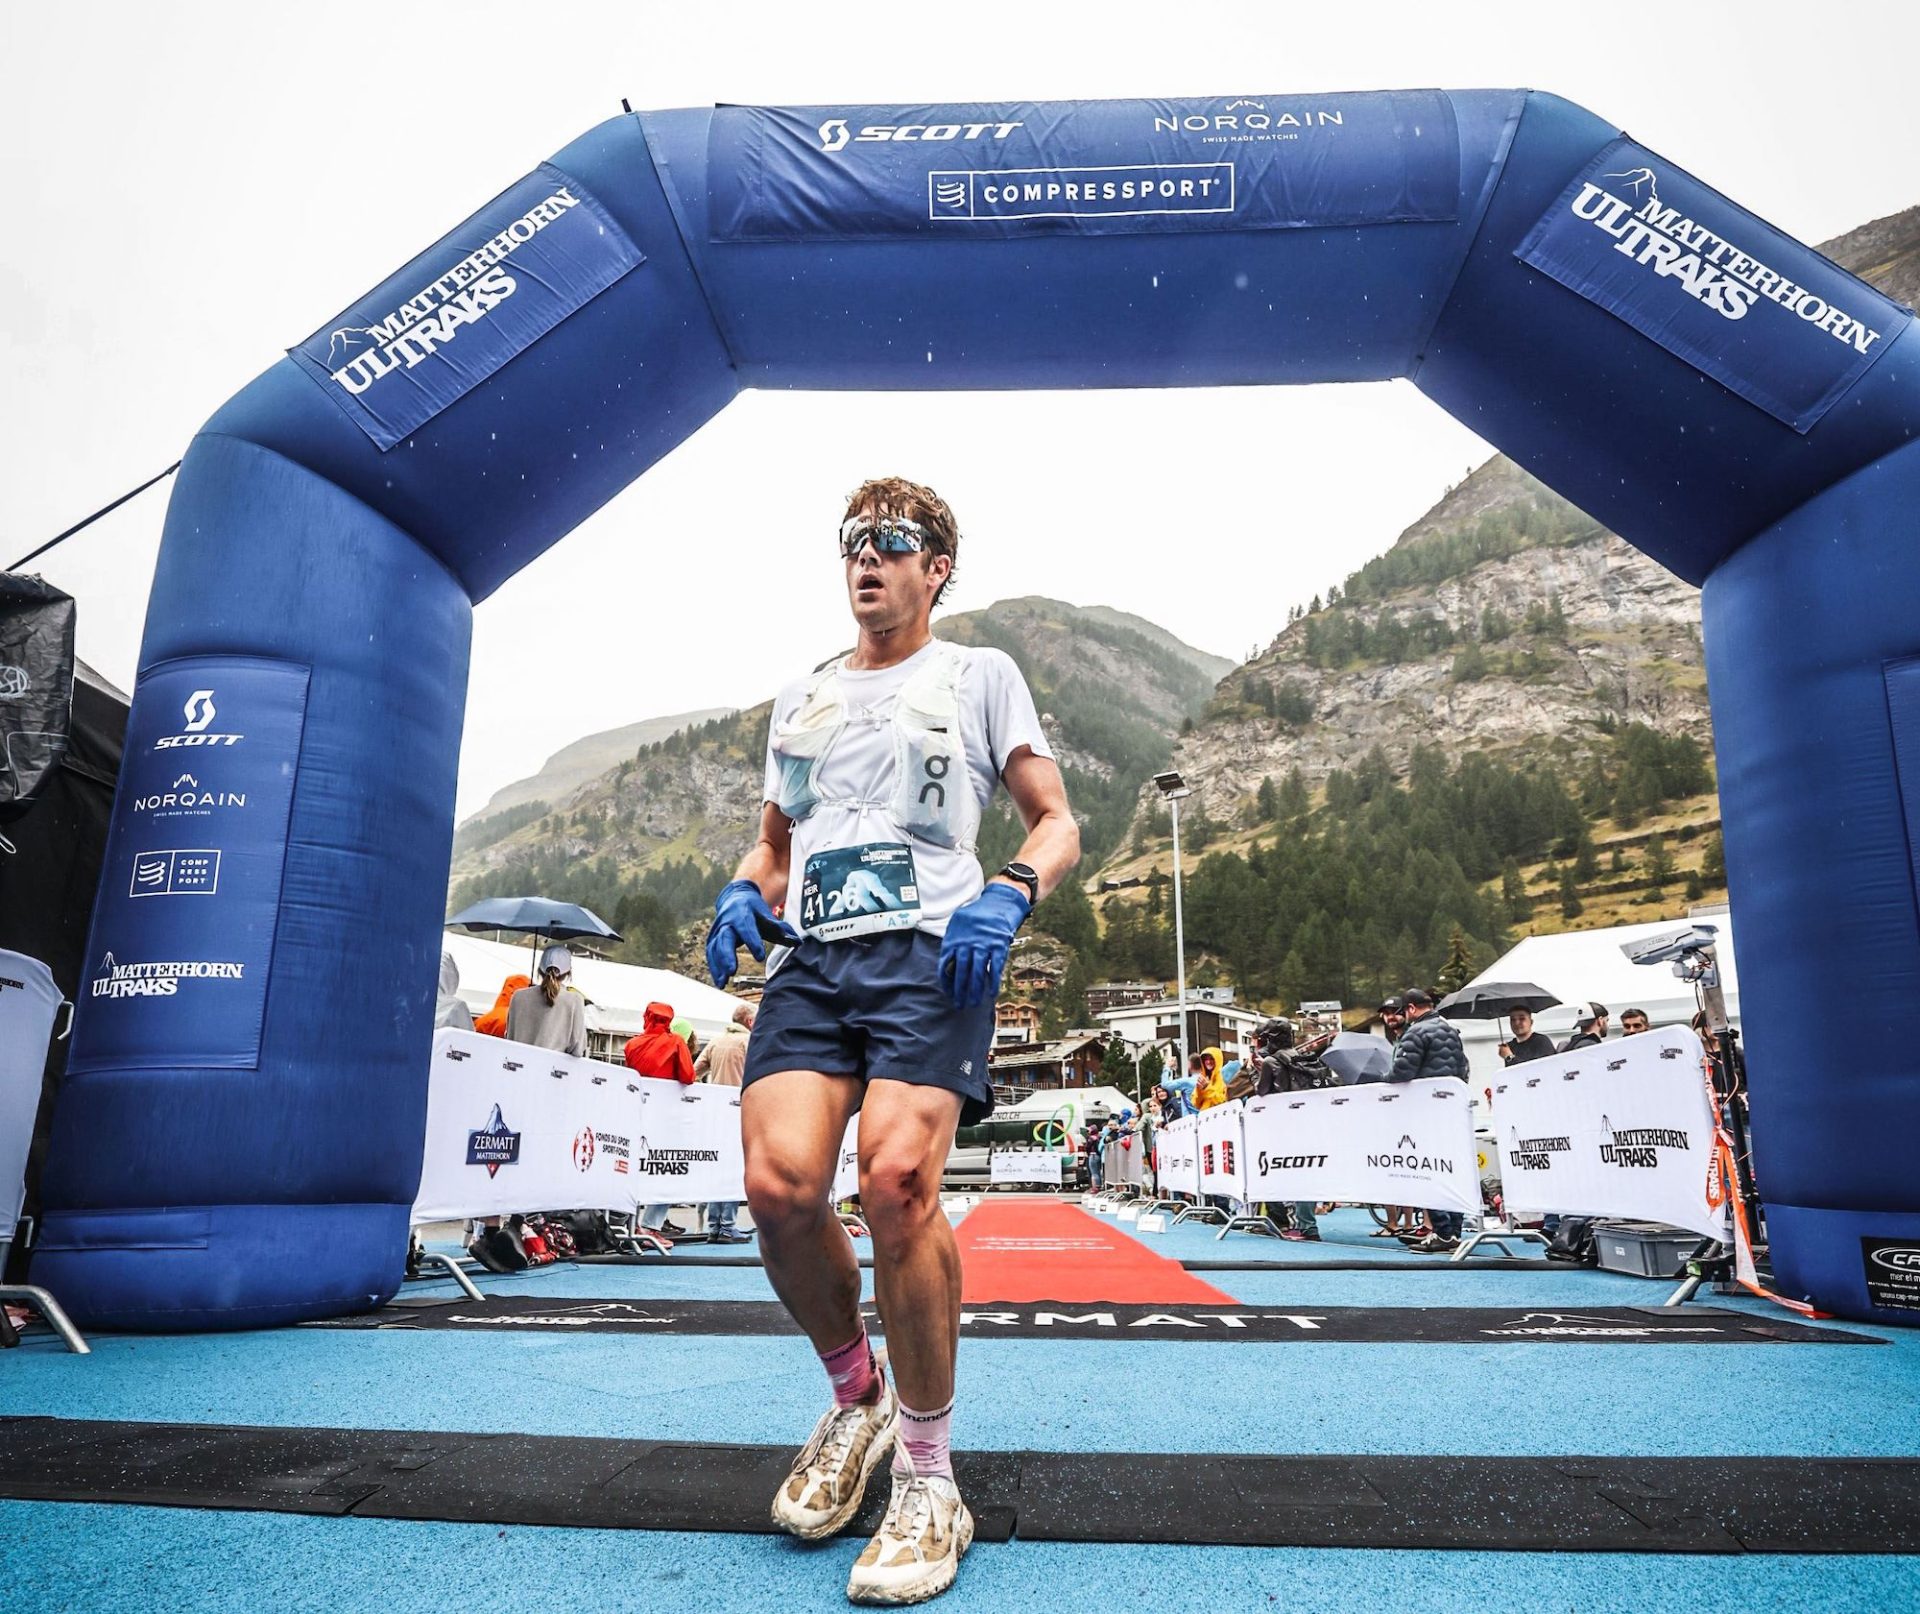 An exhausted Keir Plaice crosses the finish line at the Matterhorn Ultraks. He's the only runner in the frame. His muscled legs are dirty and one knee is bloodied from a fall. His hair hangs limp and sweaty around his face and his mouth is open in an obvious expression of fatigue.